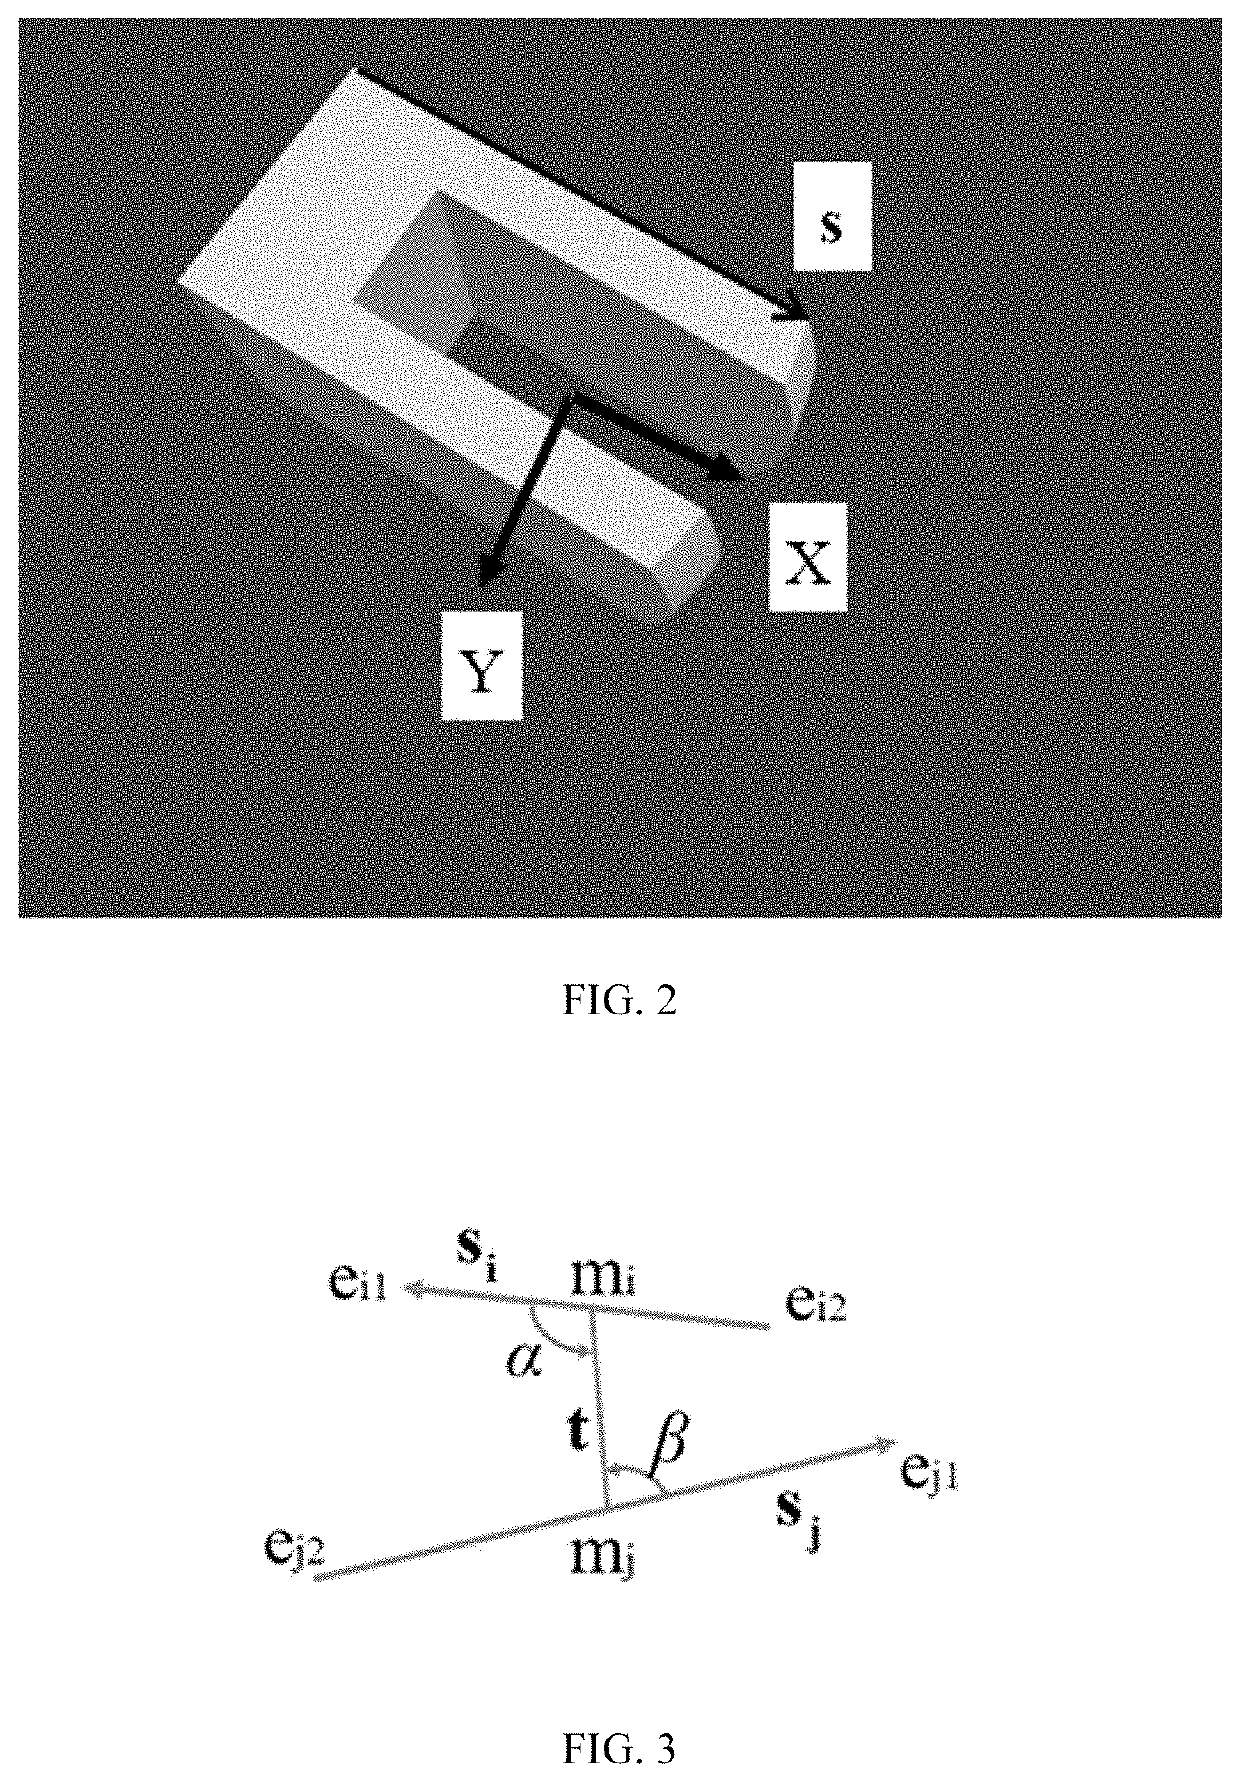 Method for grasping texture-less metal parts based on bold image matching